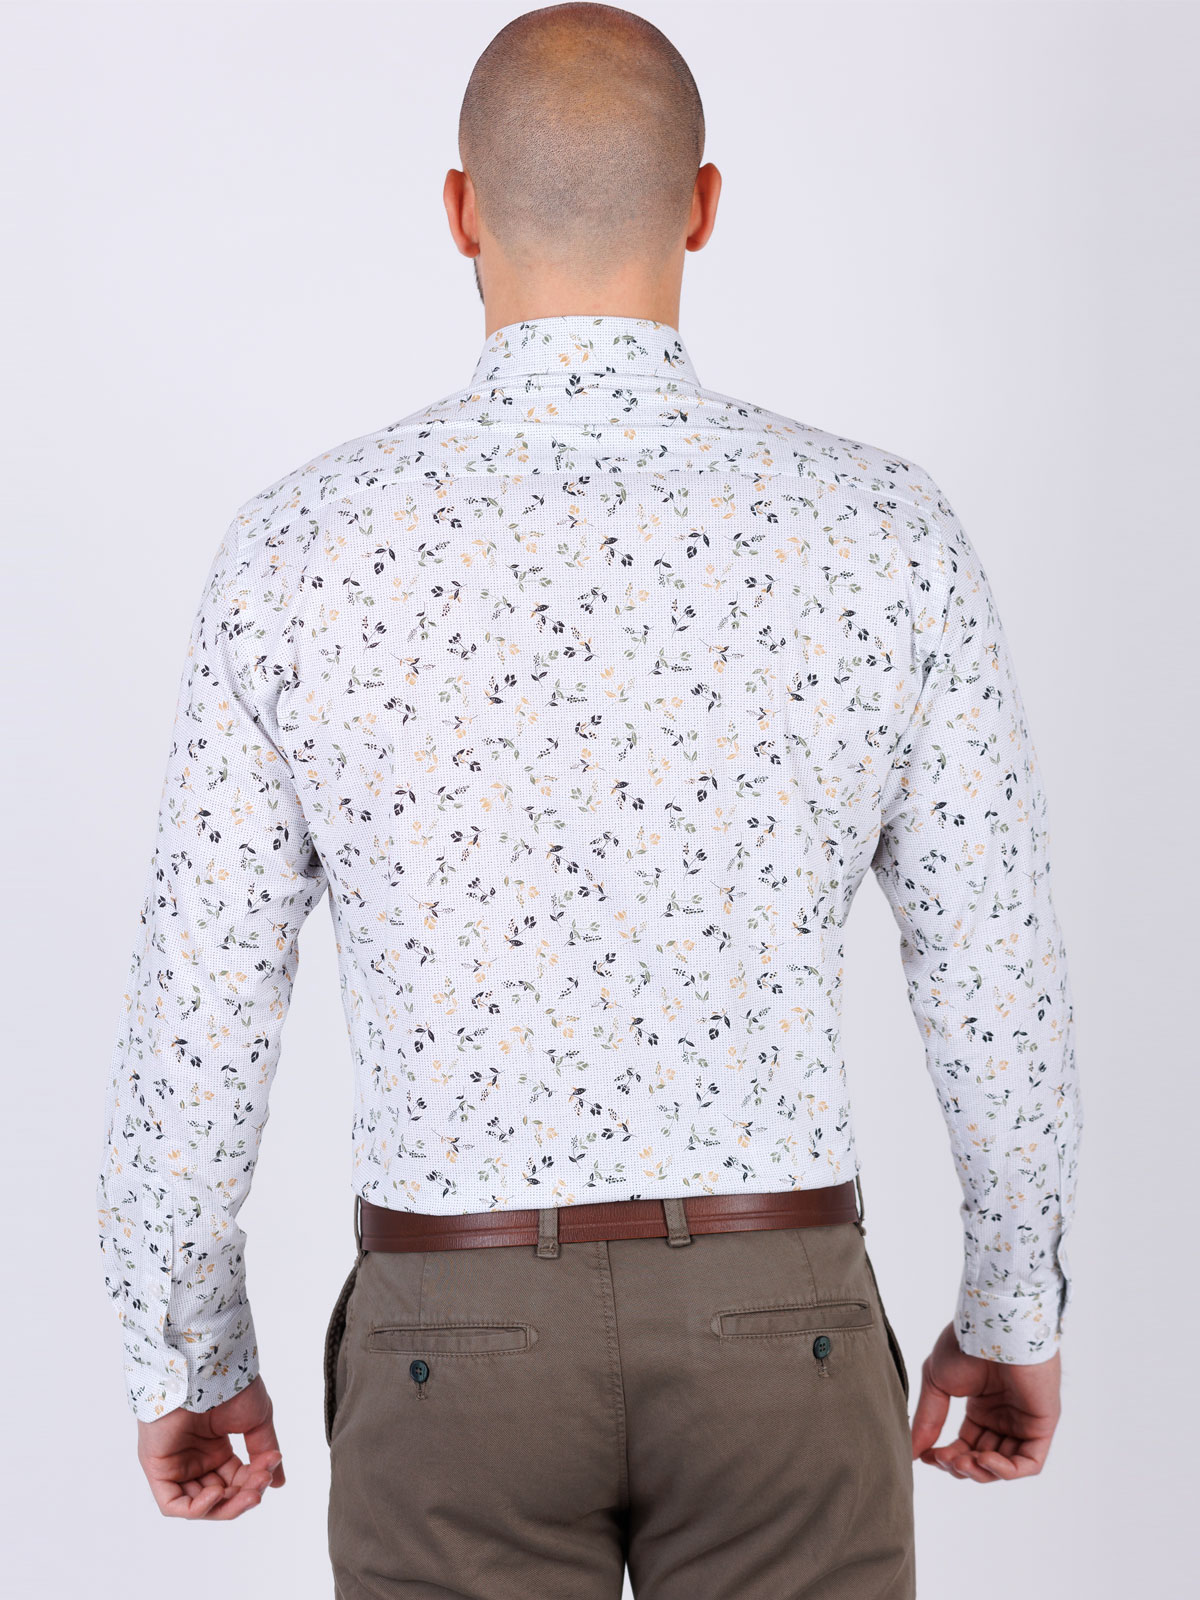 Mens shirt in white with printed leaves - 21547 € 43.87 img2